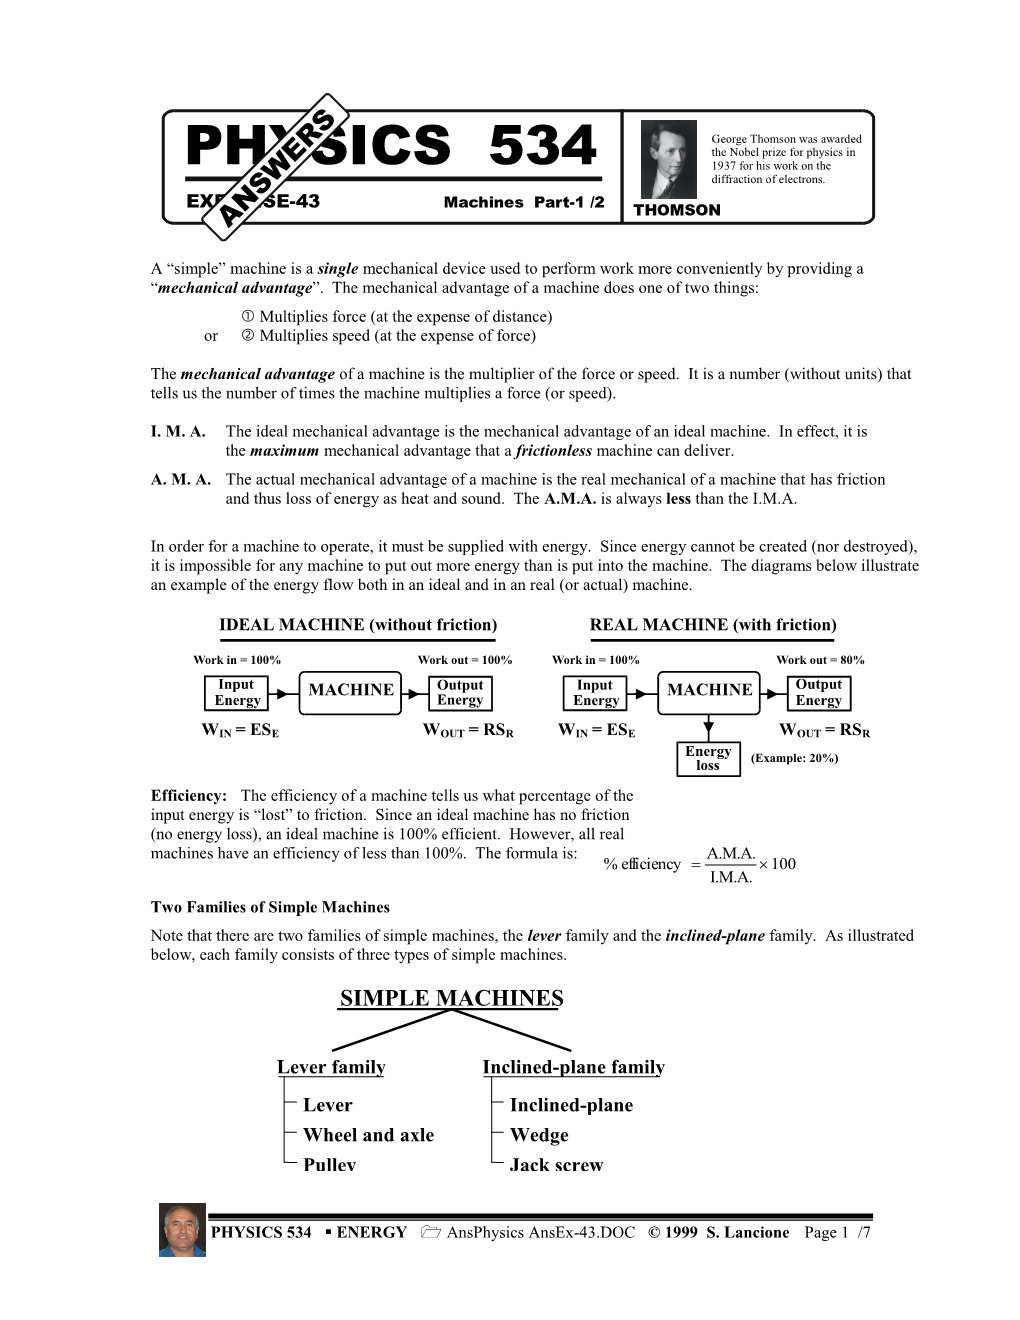 Physics in PHYSICS 534 1937 for His Work on the W Diffraction of Electrons